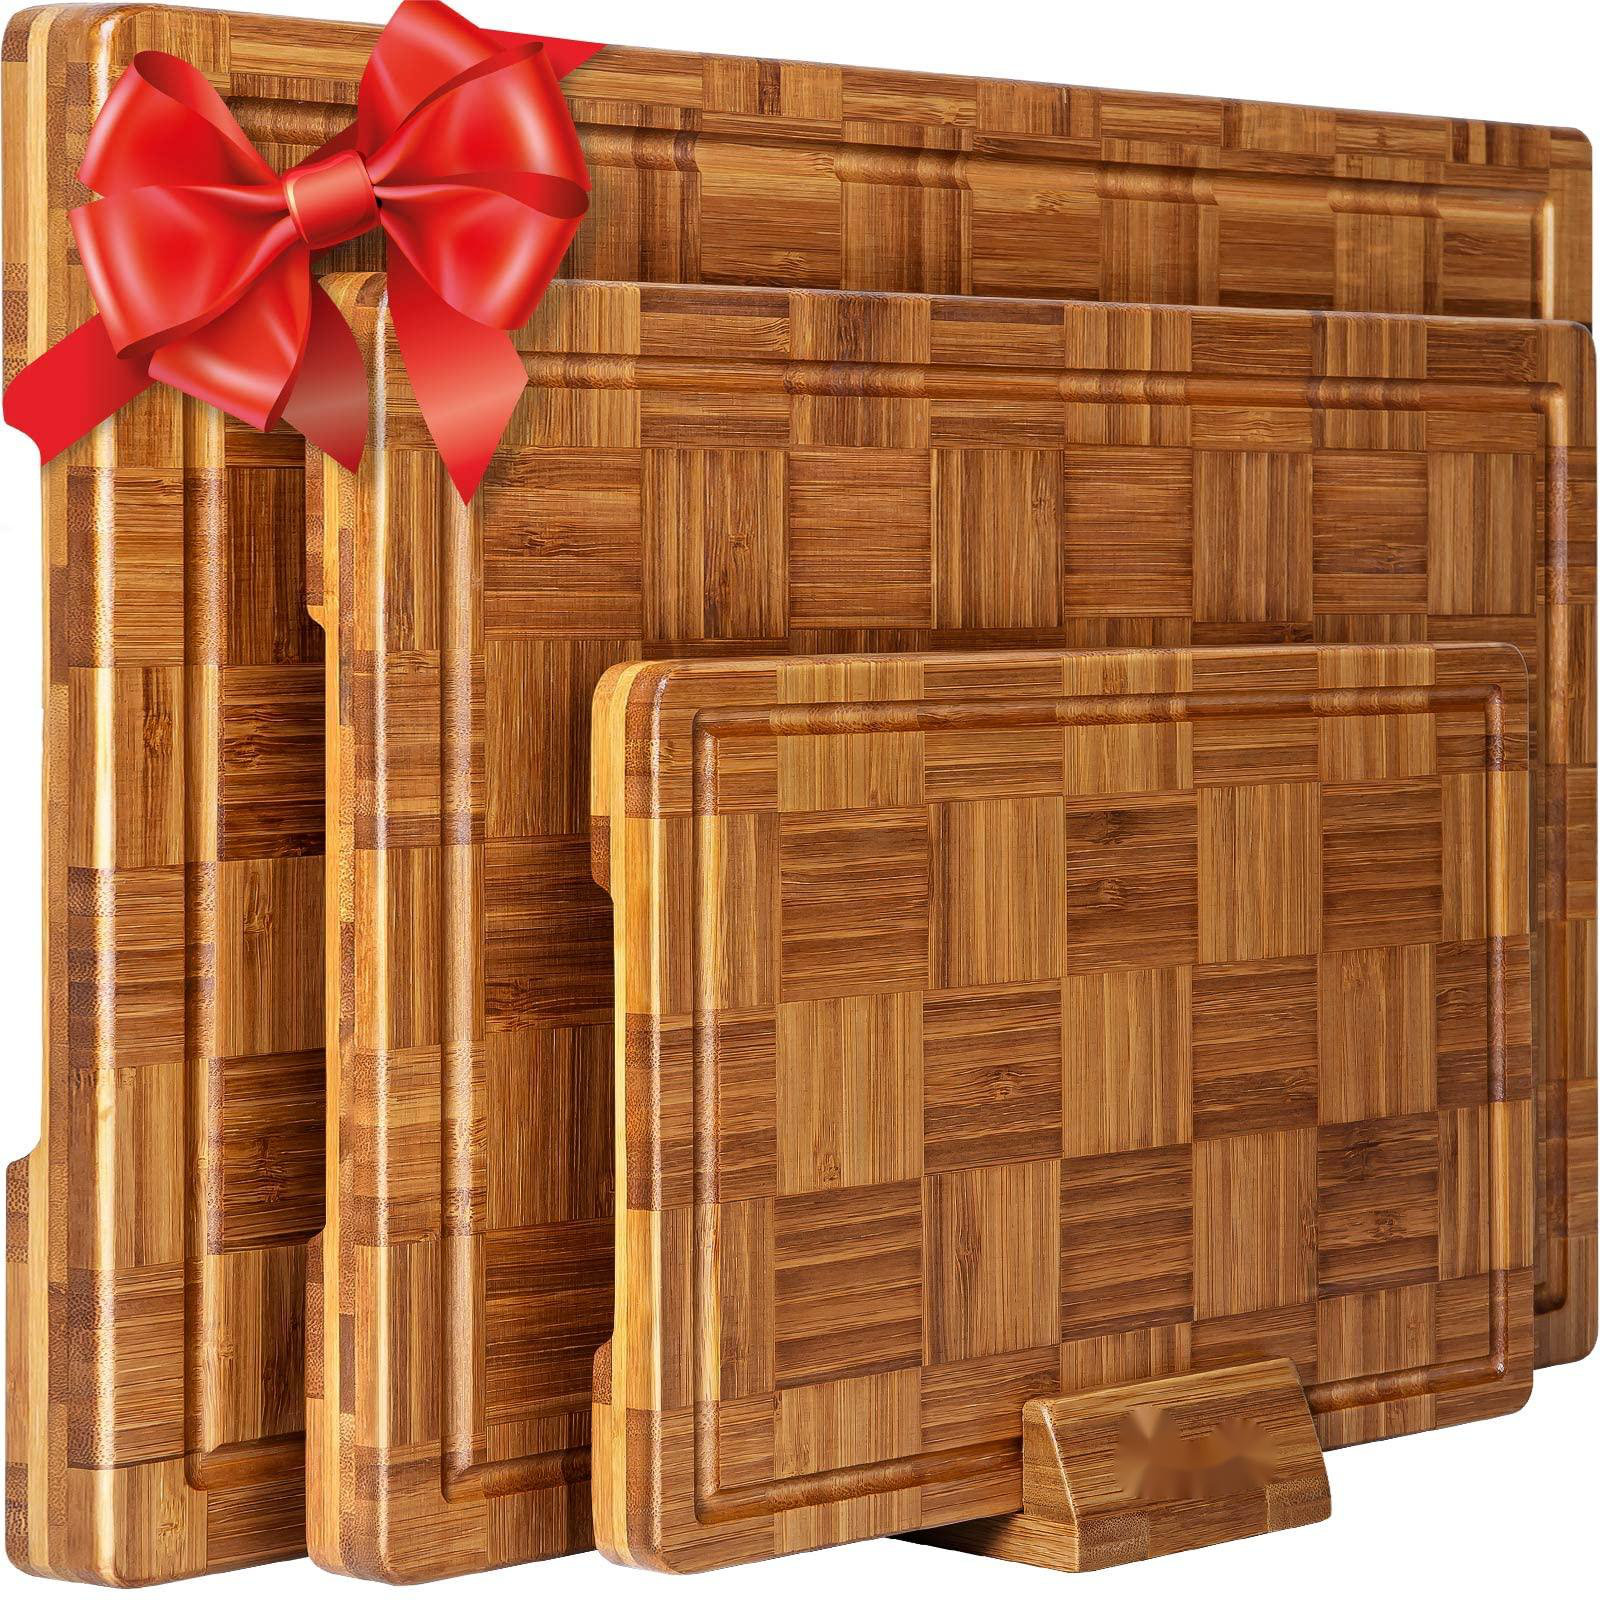 Bamboo Cutting Boards for Kitchen - Wood Cutting Board with Juice Grooves - Small  Wood Cutting Board for